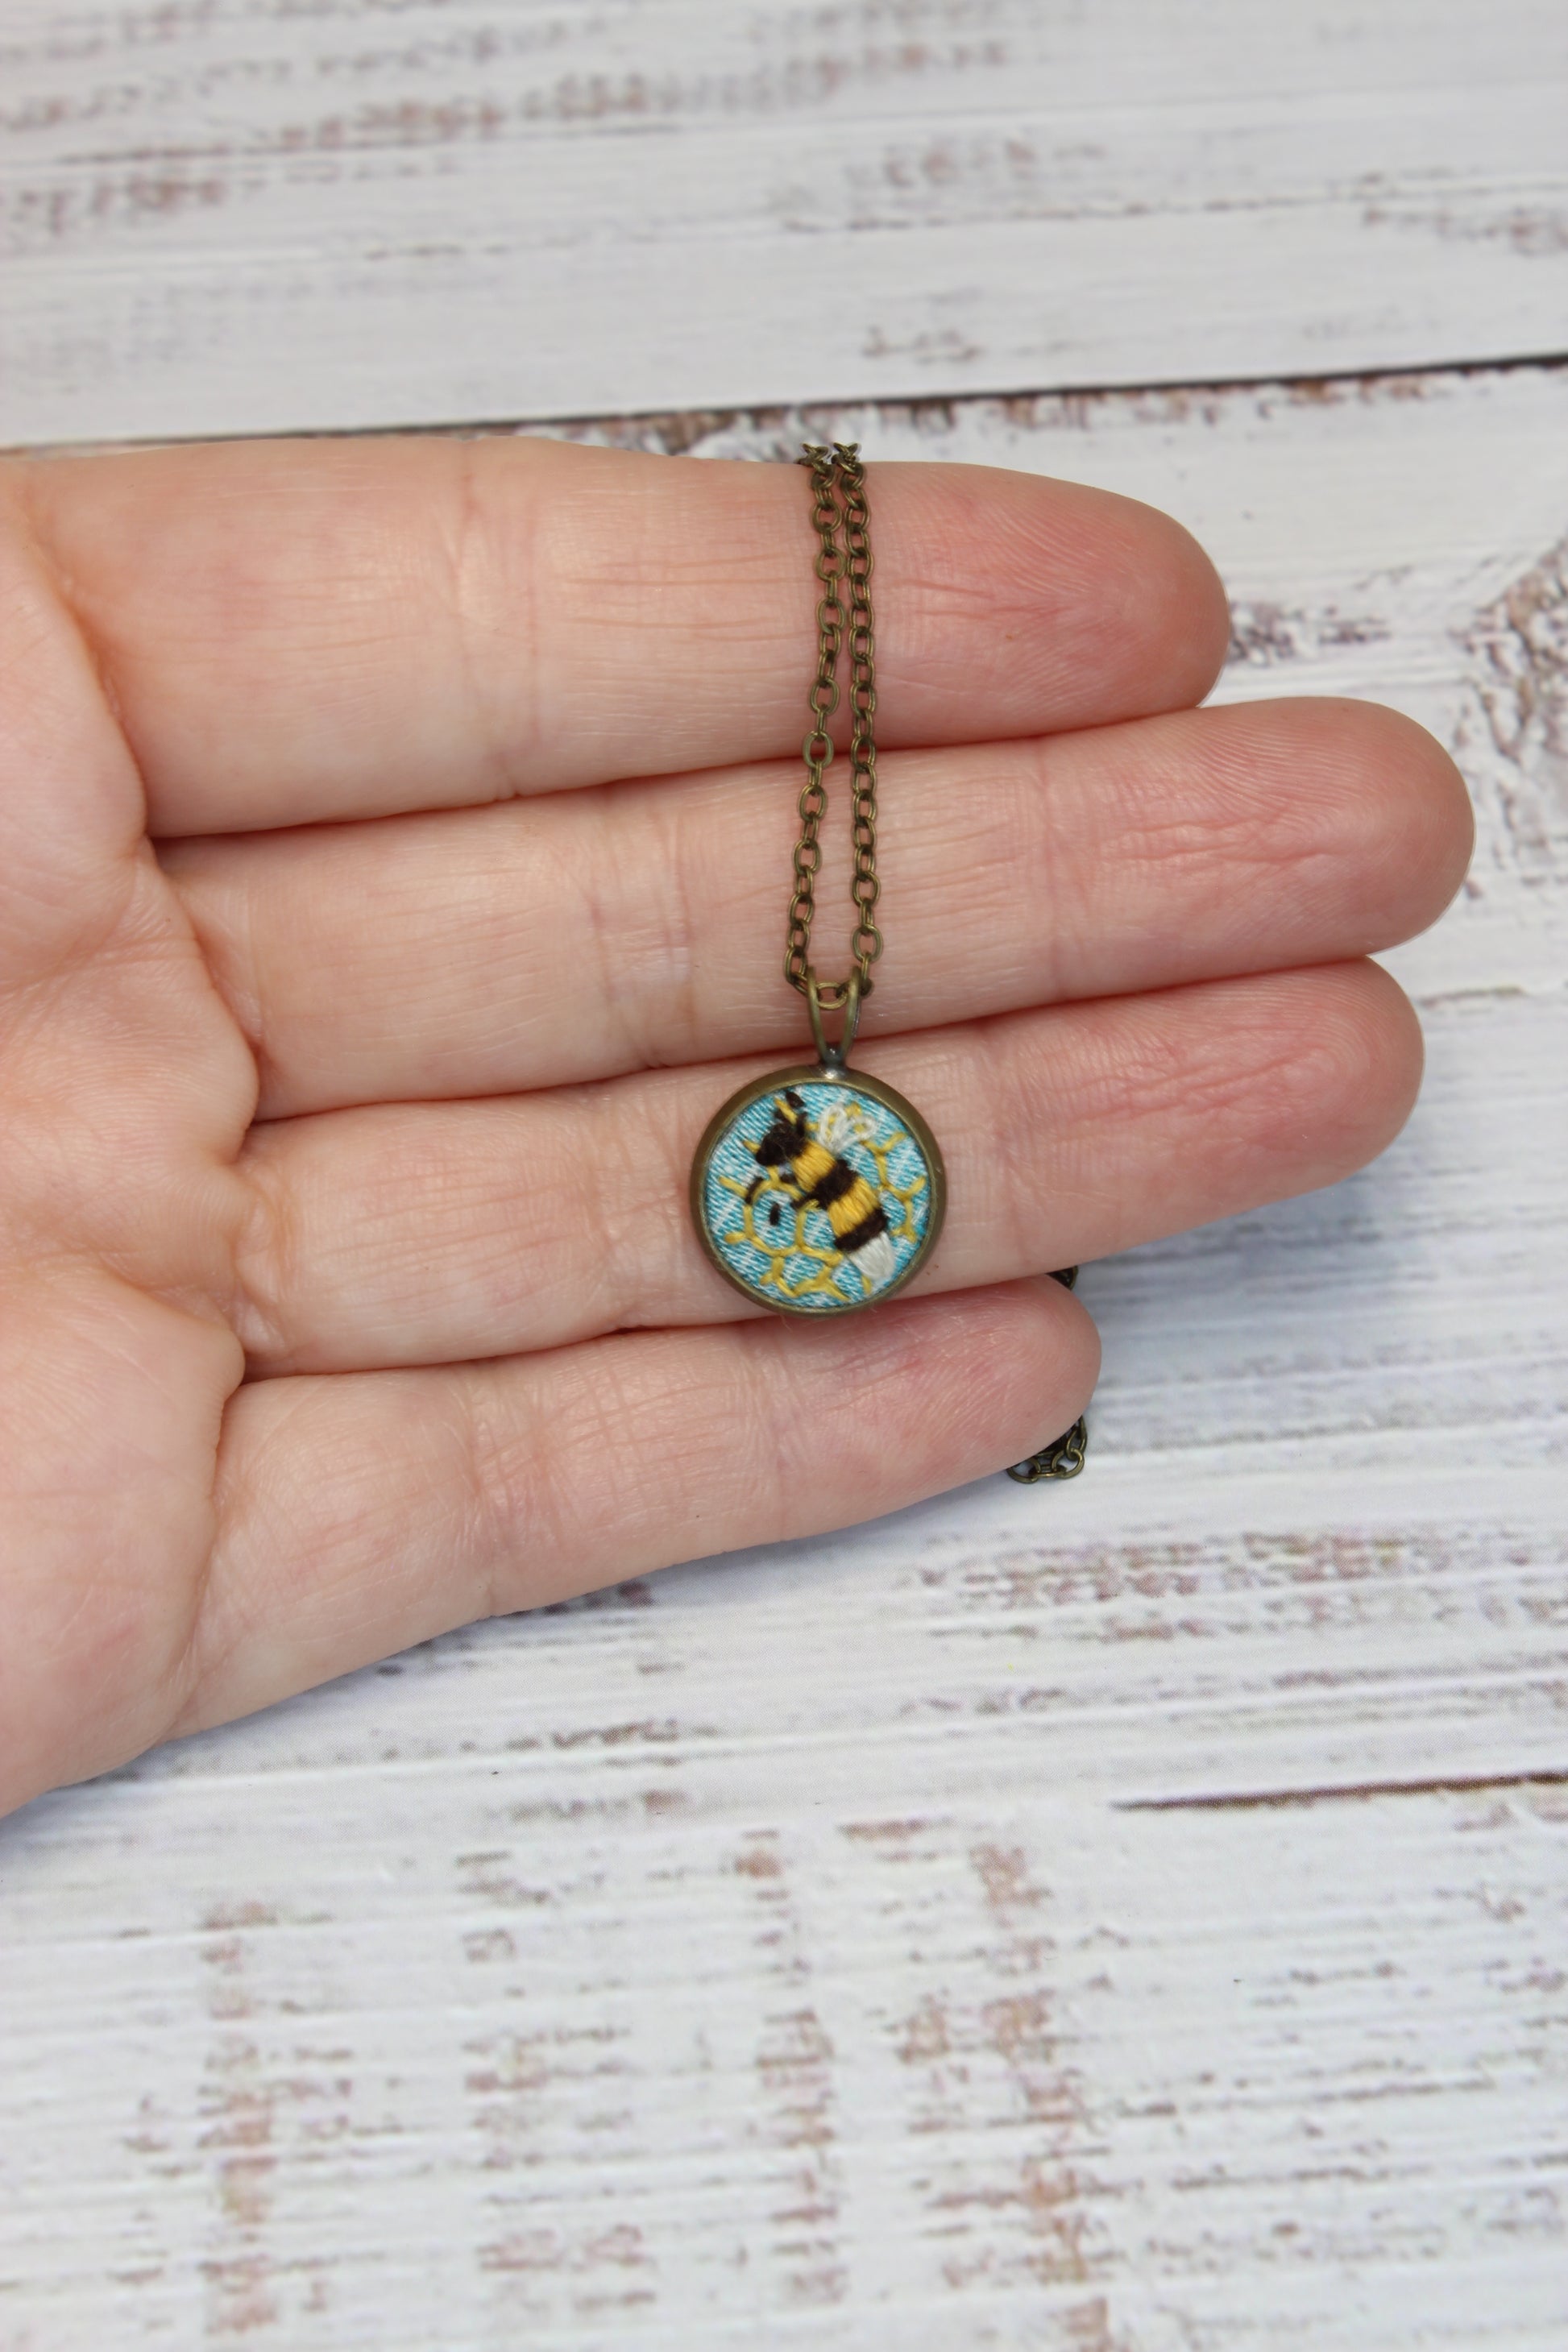 Embroidery Bee Necklace